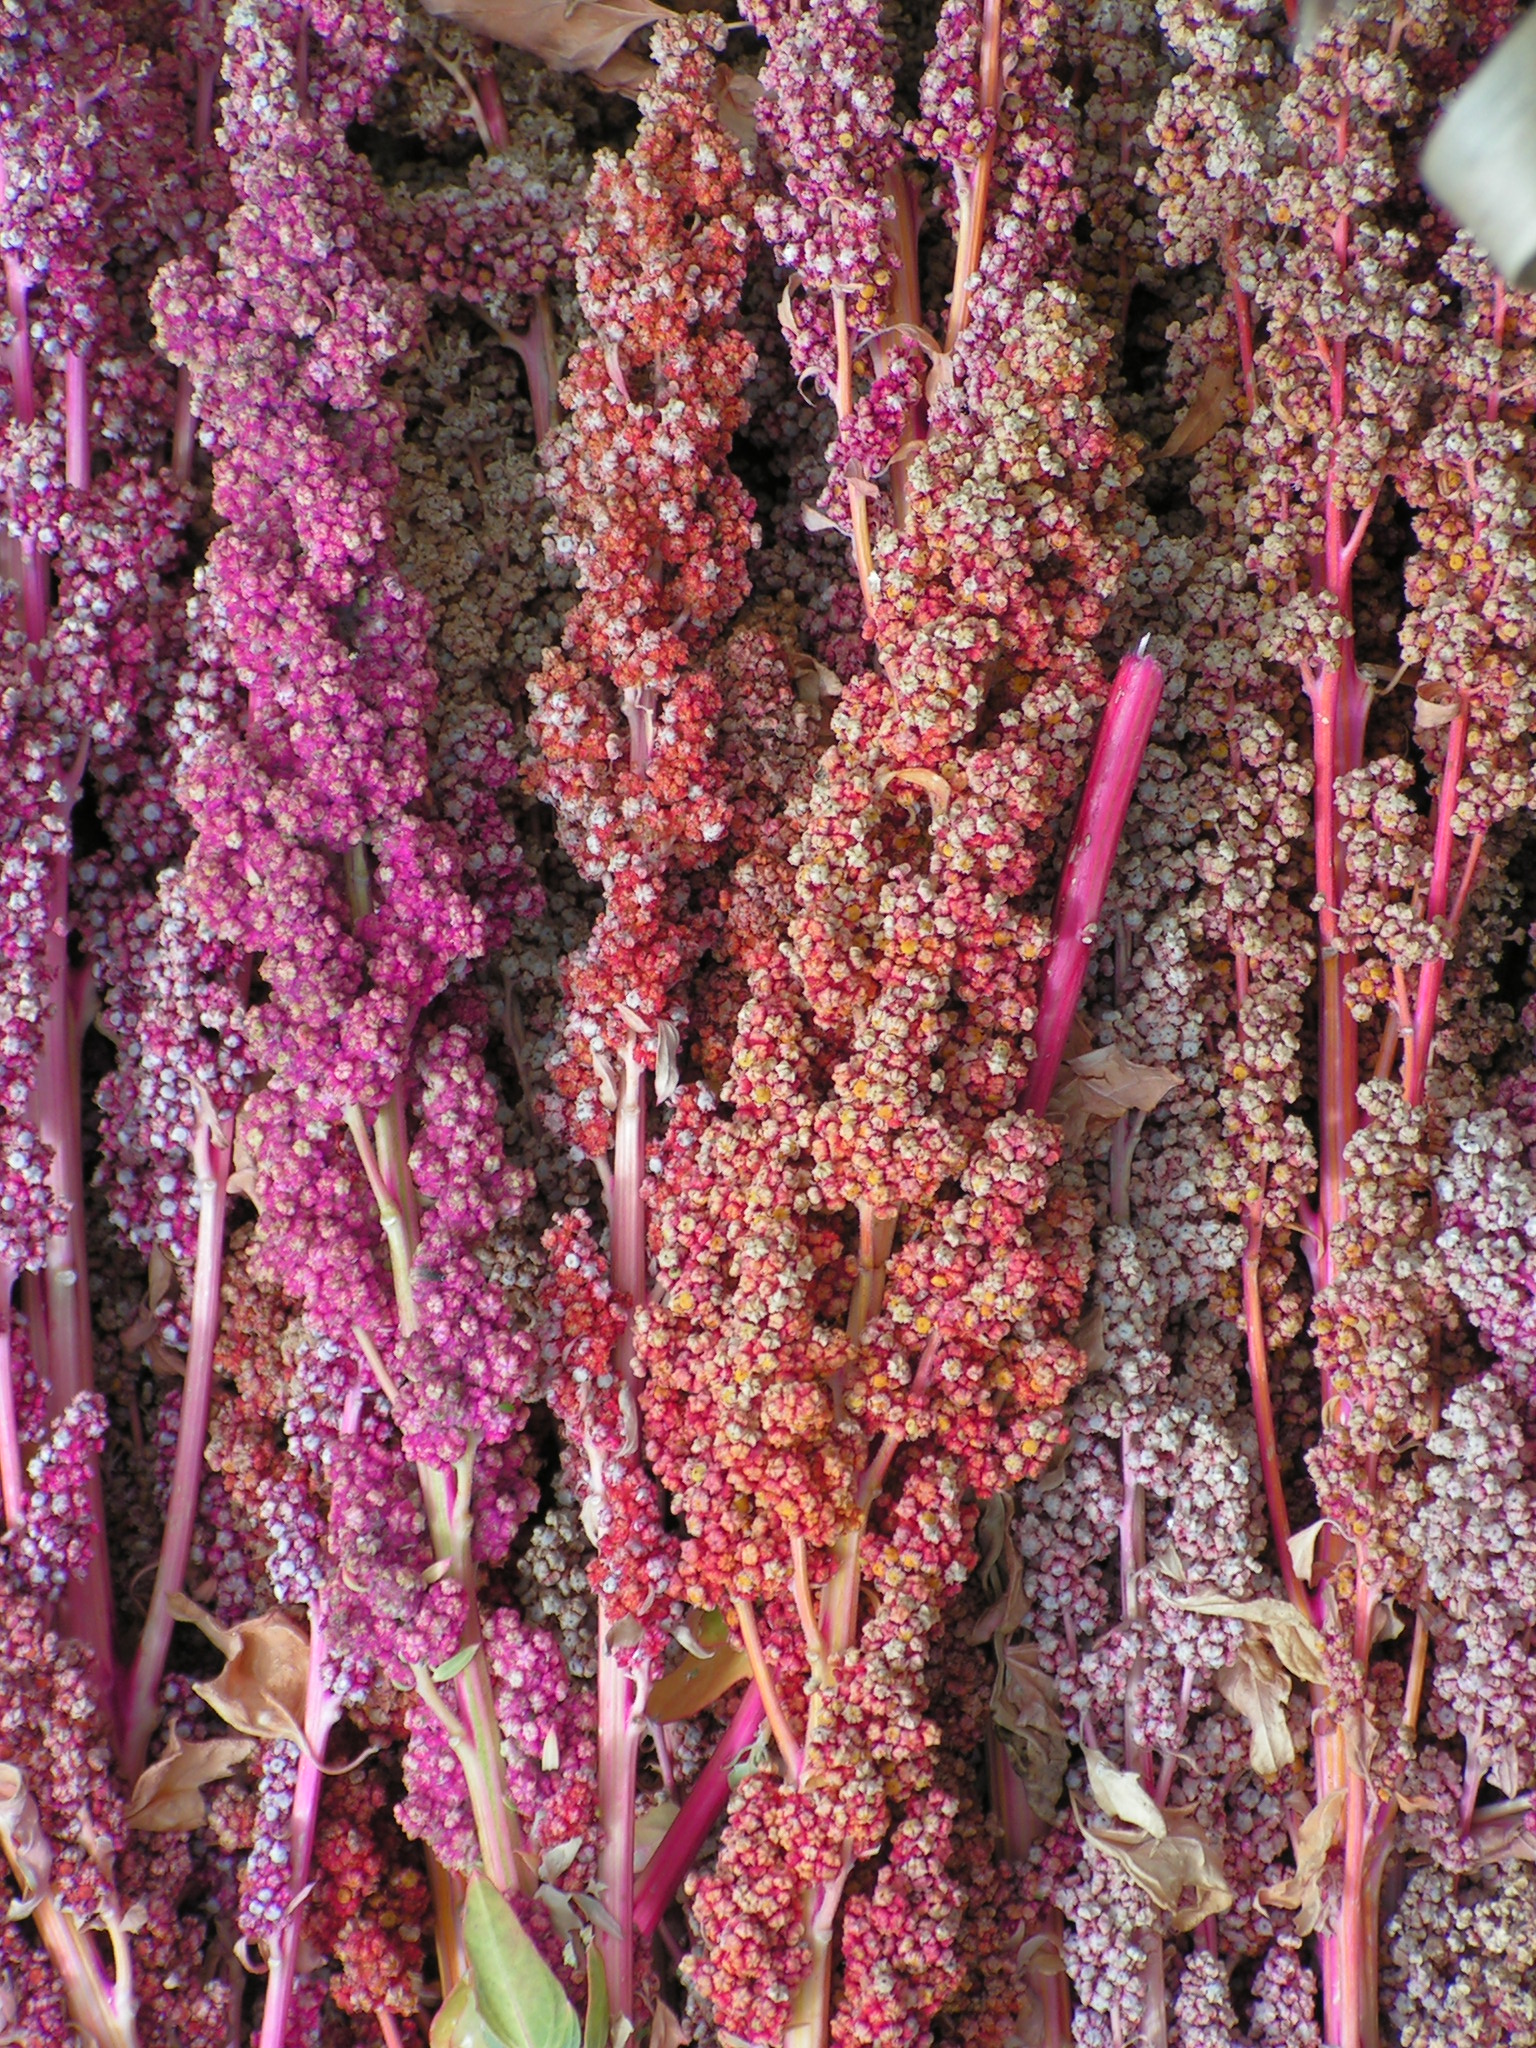 quinoa panicles after harvest